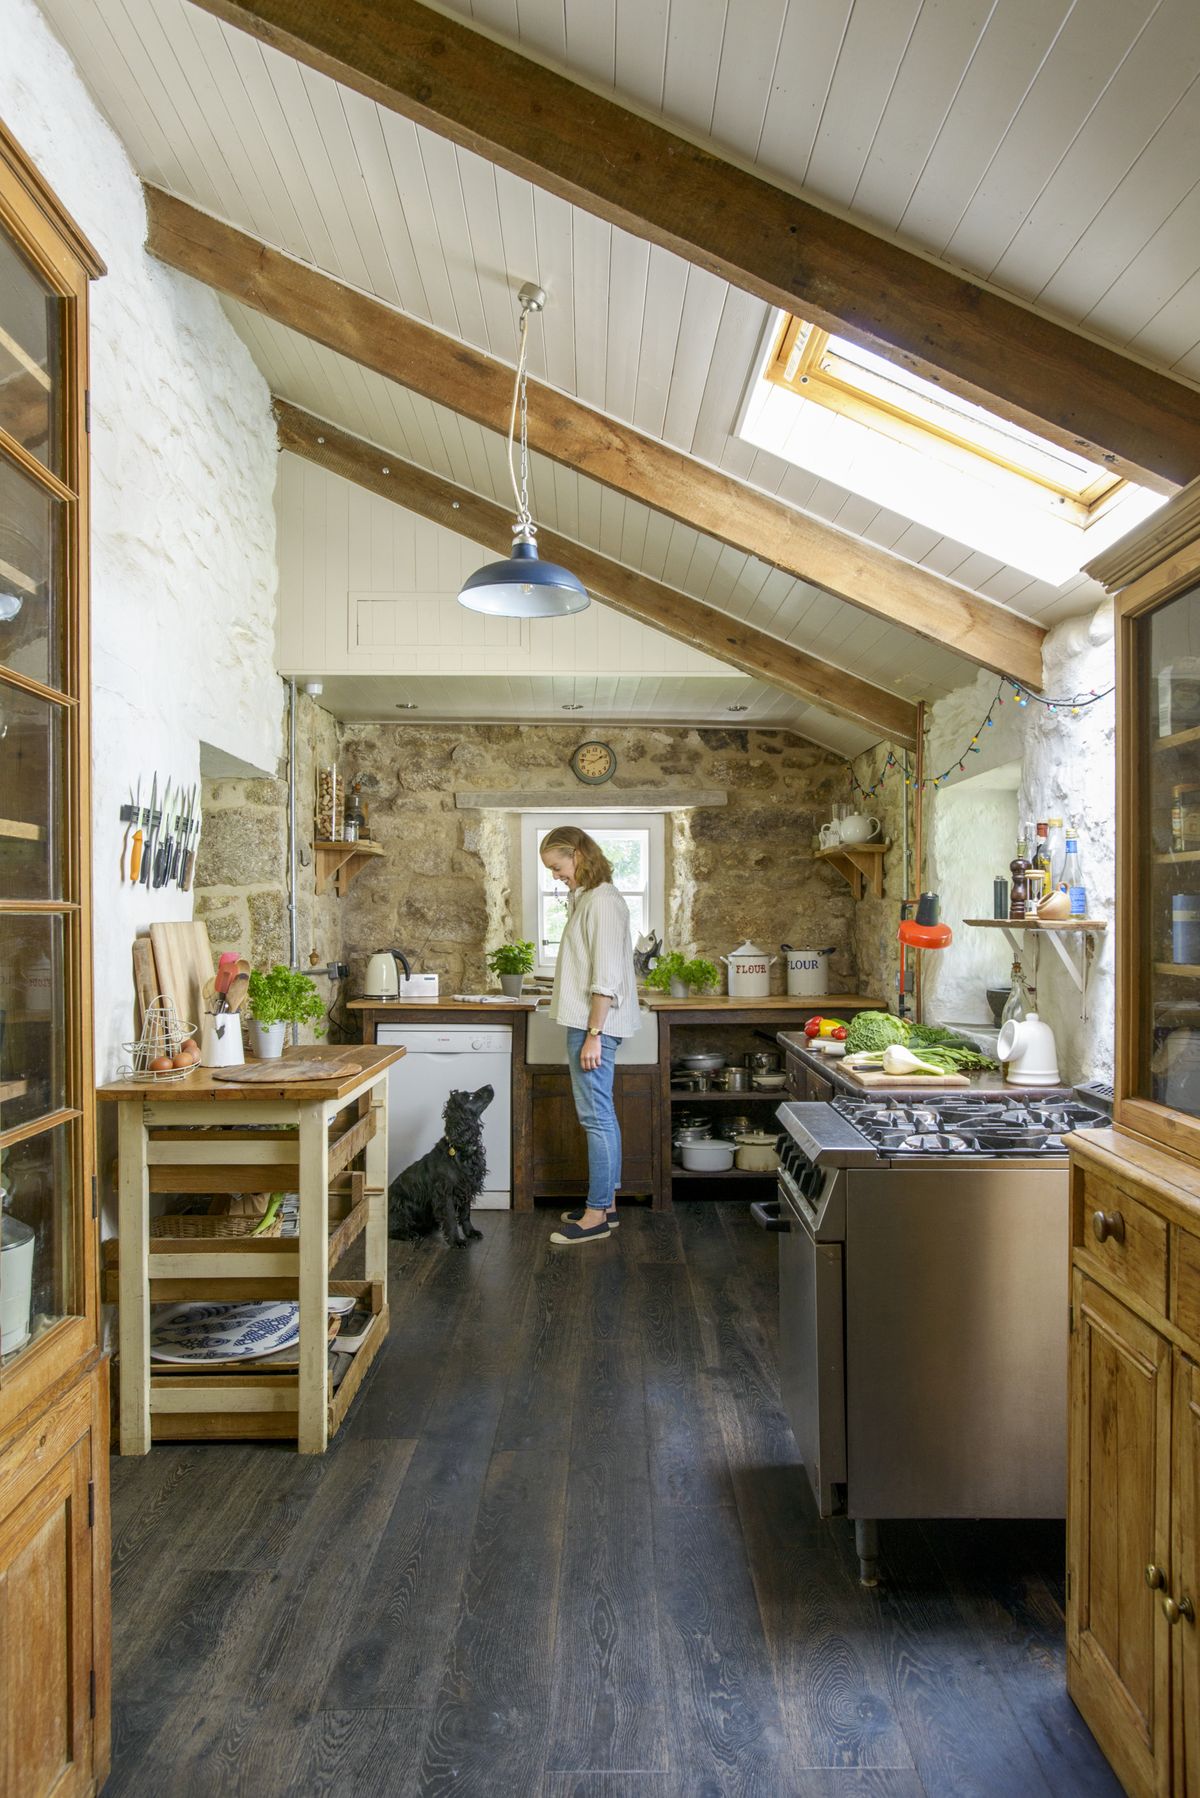 Freestanding Kitchens 17 Flexible Ways To Create A Rustic Look Real Homes